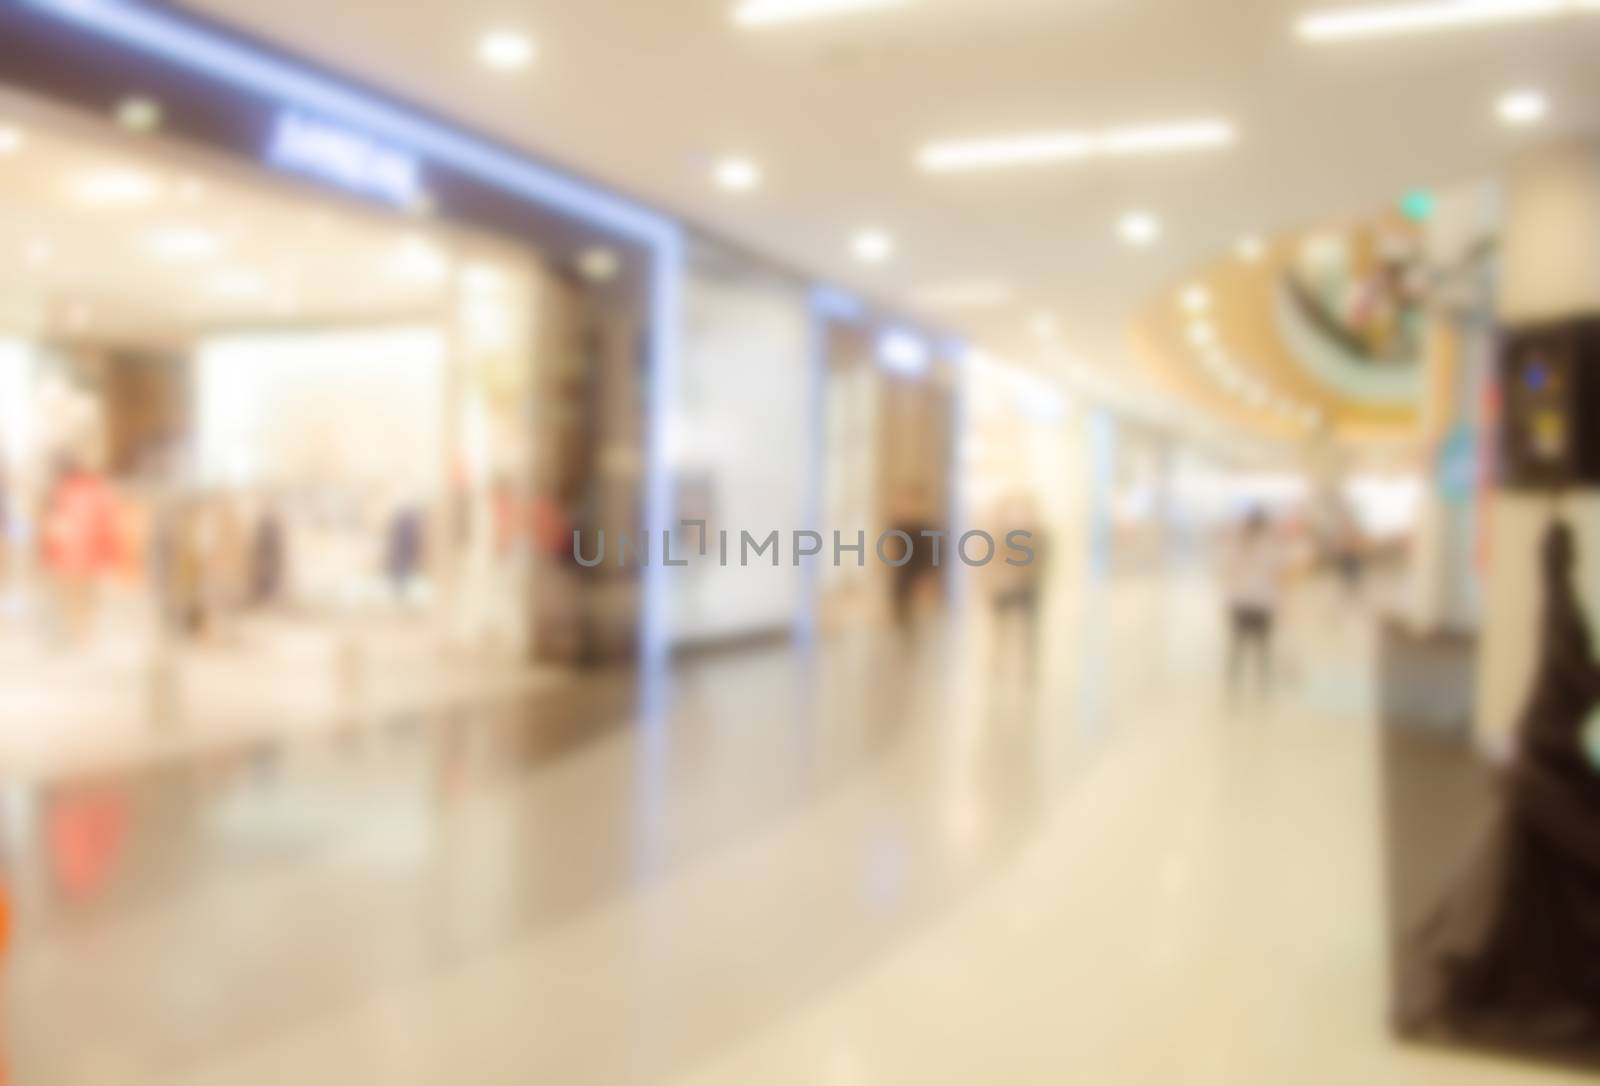 Blur the people in shopping mall. by photobyphotoboy